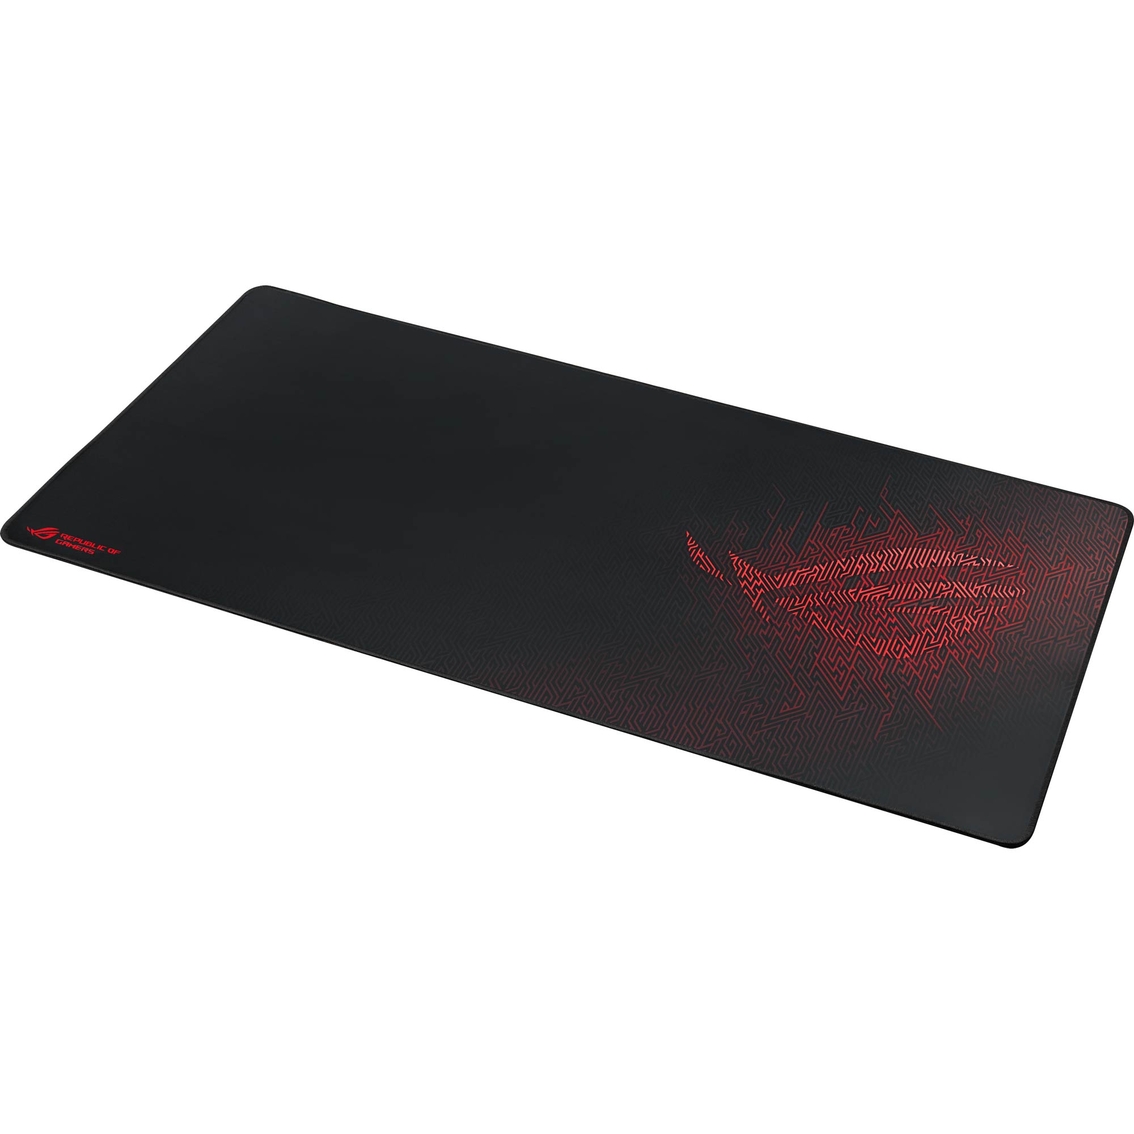 Asus ROG Sheath BLK Limited Edition Extra-Large Gaming Surface Mouse Pad - Image 2 of 9